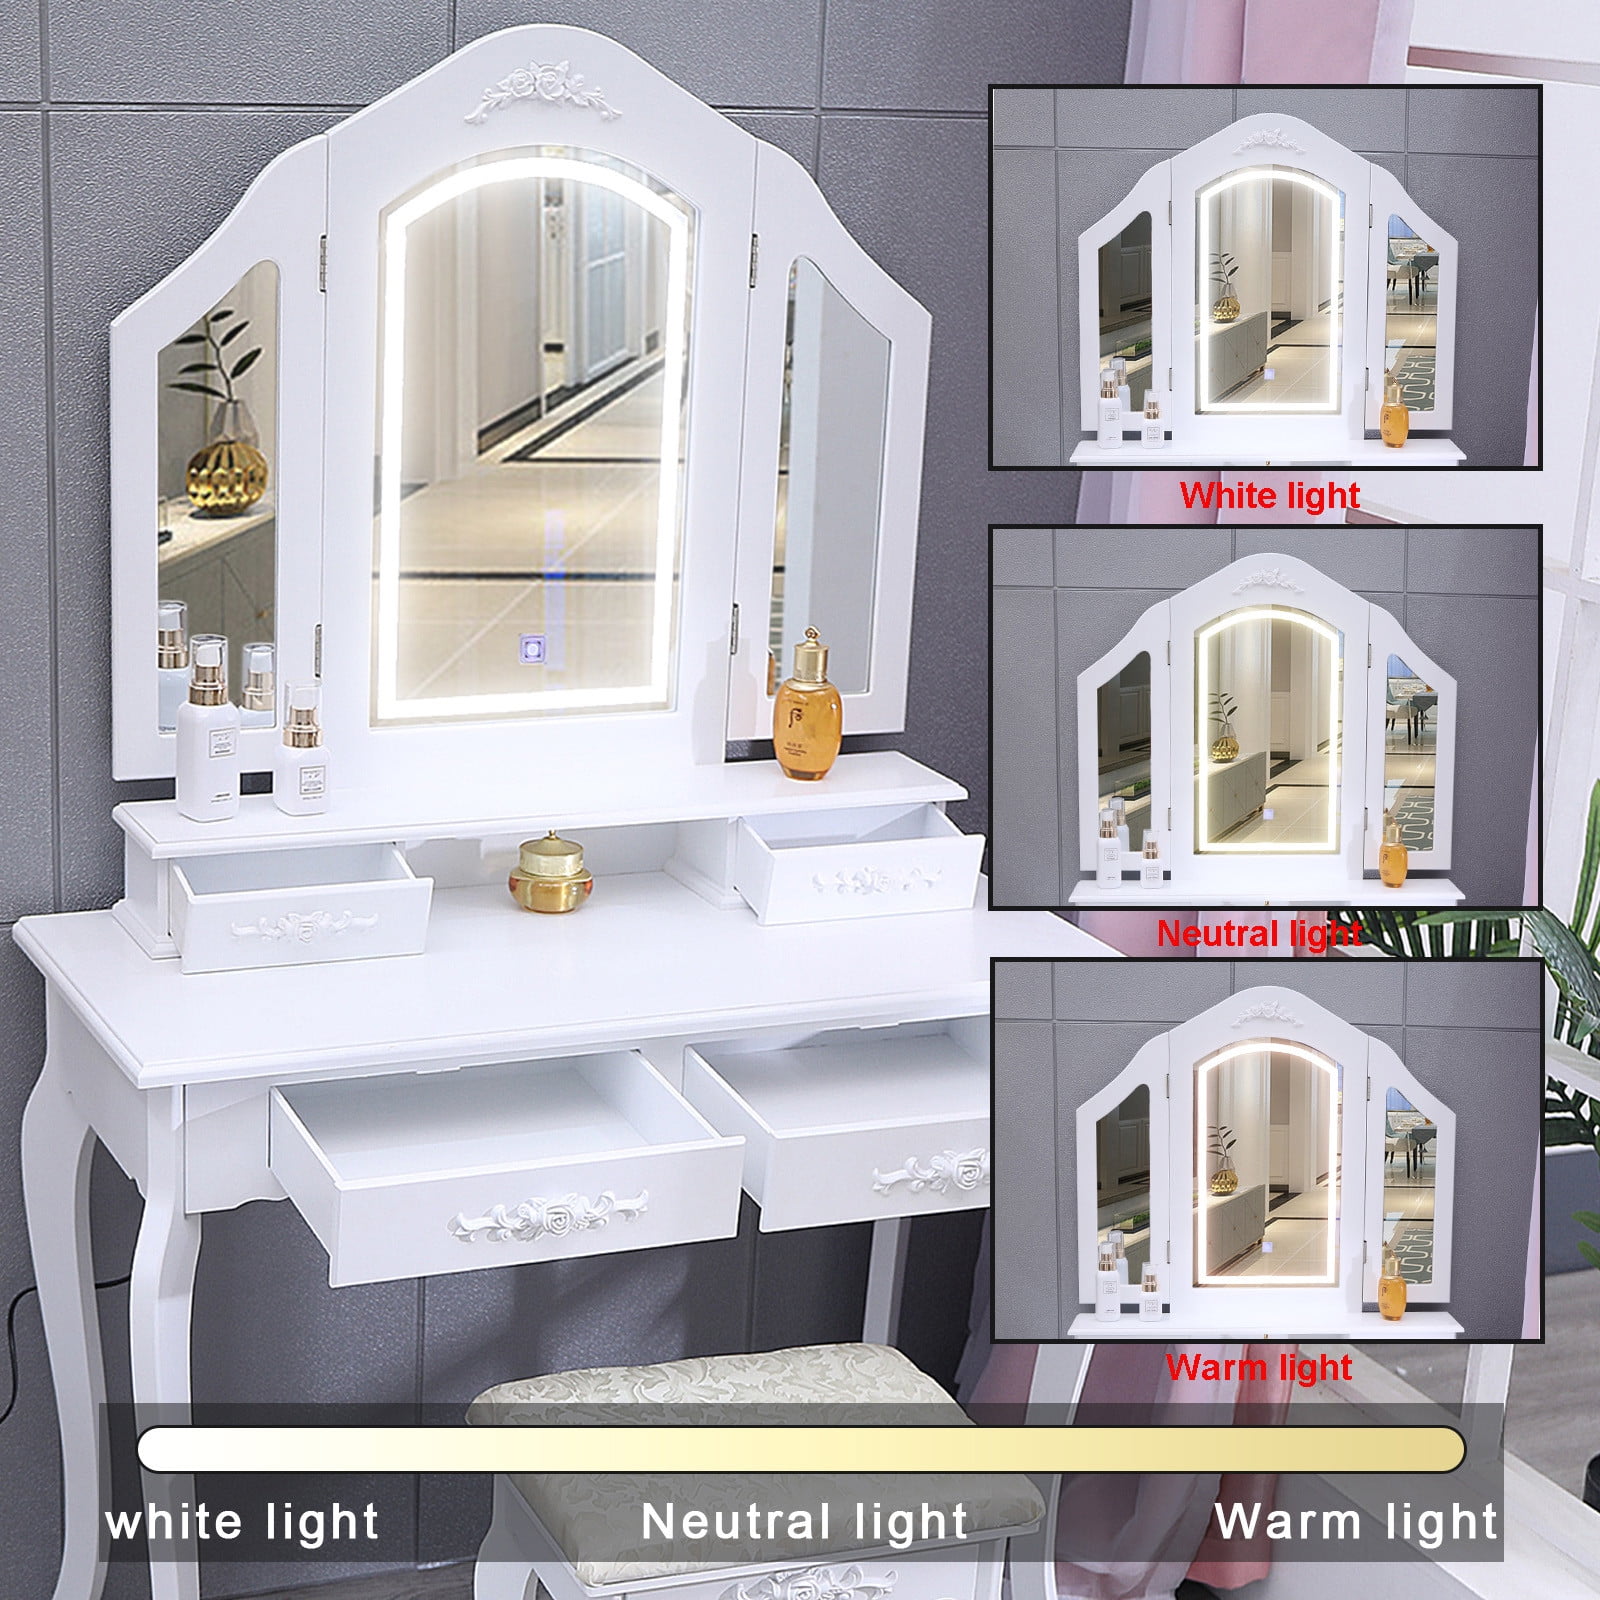 Details about   Vanity Beauty Makeup Table And Wooden Stool 3 Mirrors With LED Lights USA 